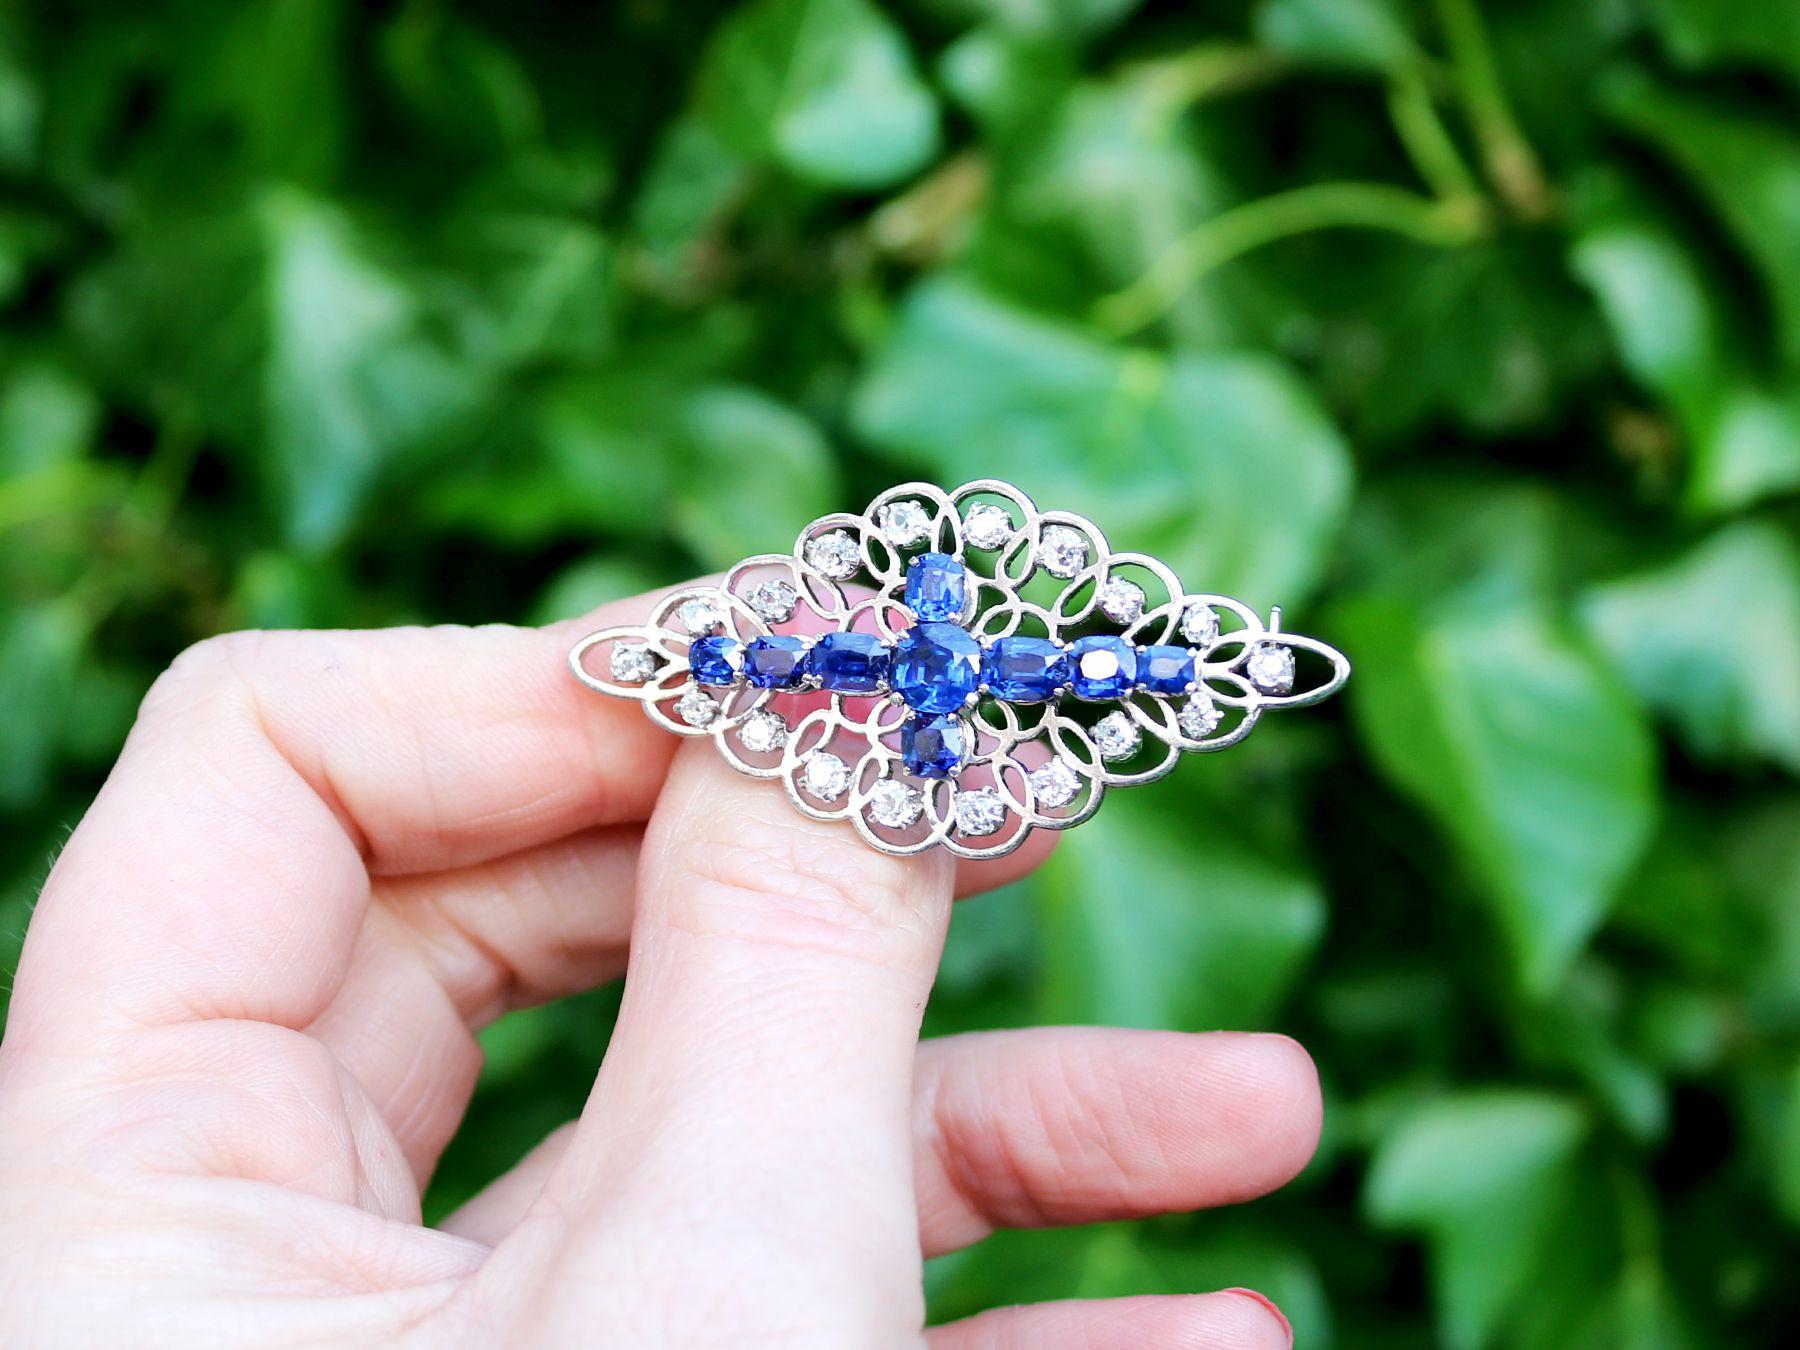 A stunning, fine and impressive antique 3.05 carat sapphire and 1.23 carat diamond, 9 karat white gold brooch; part of our diverse antique jewelry collection

This stunning, fine and impressive antique sapphire and diamond brooch has been crafted in